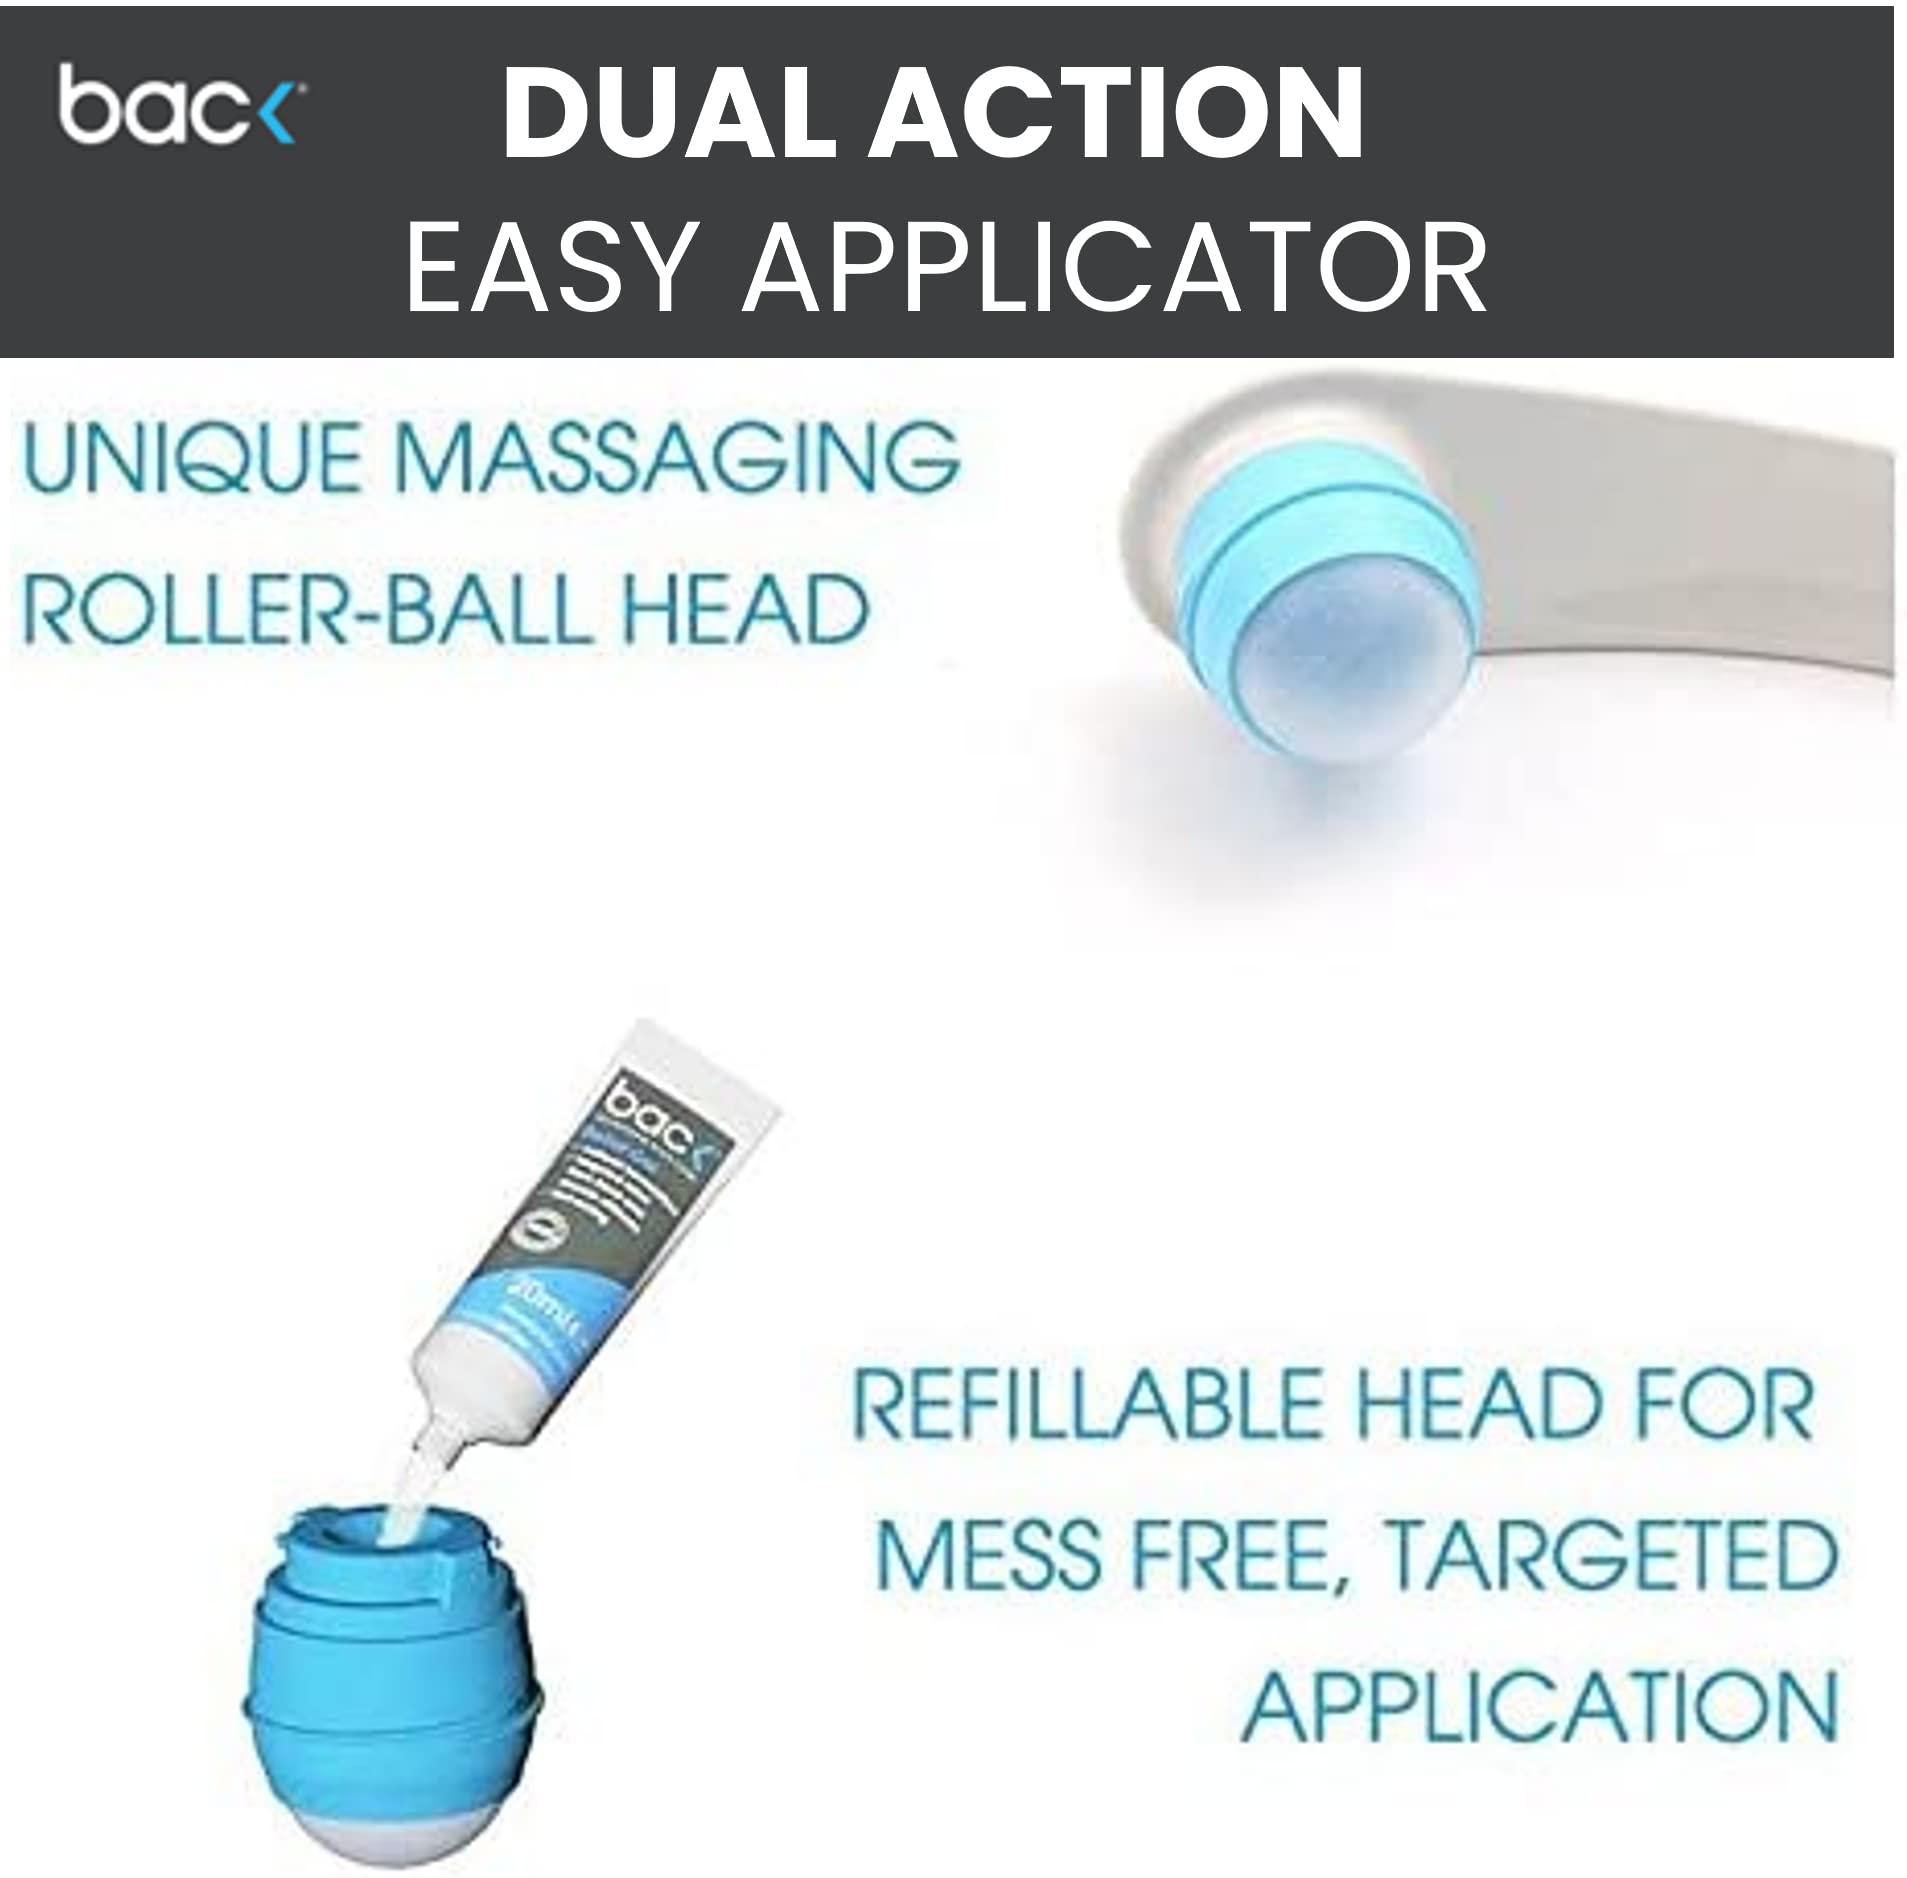 Back Easy Lotion Applicator for applying Your Favorite Topical Gel or Cream to Hard to Reach Places. Easy to use & Refill!